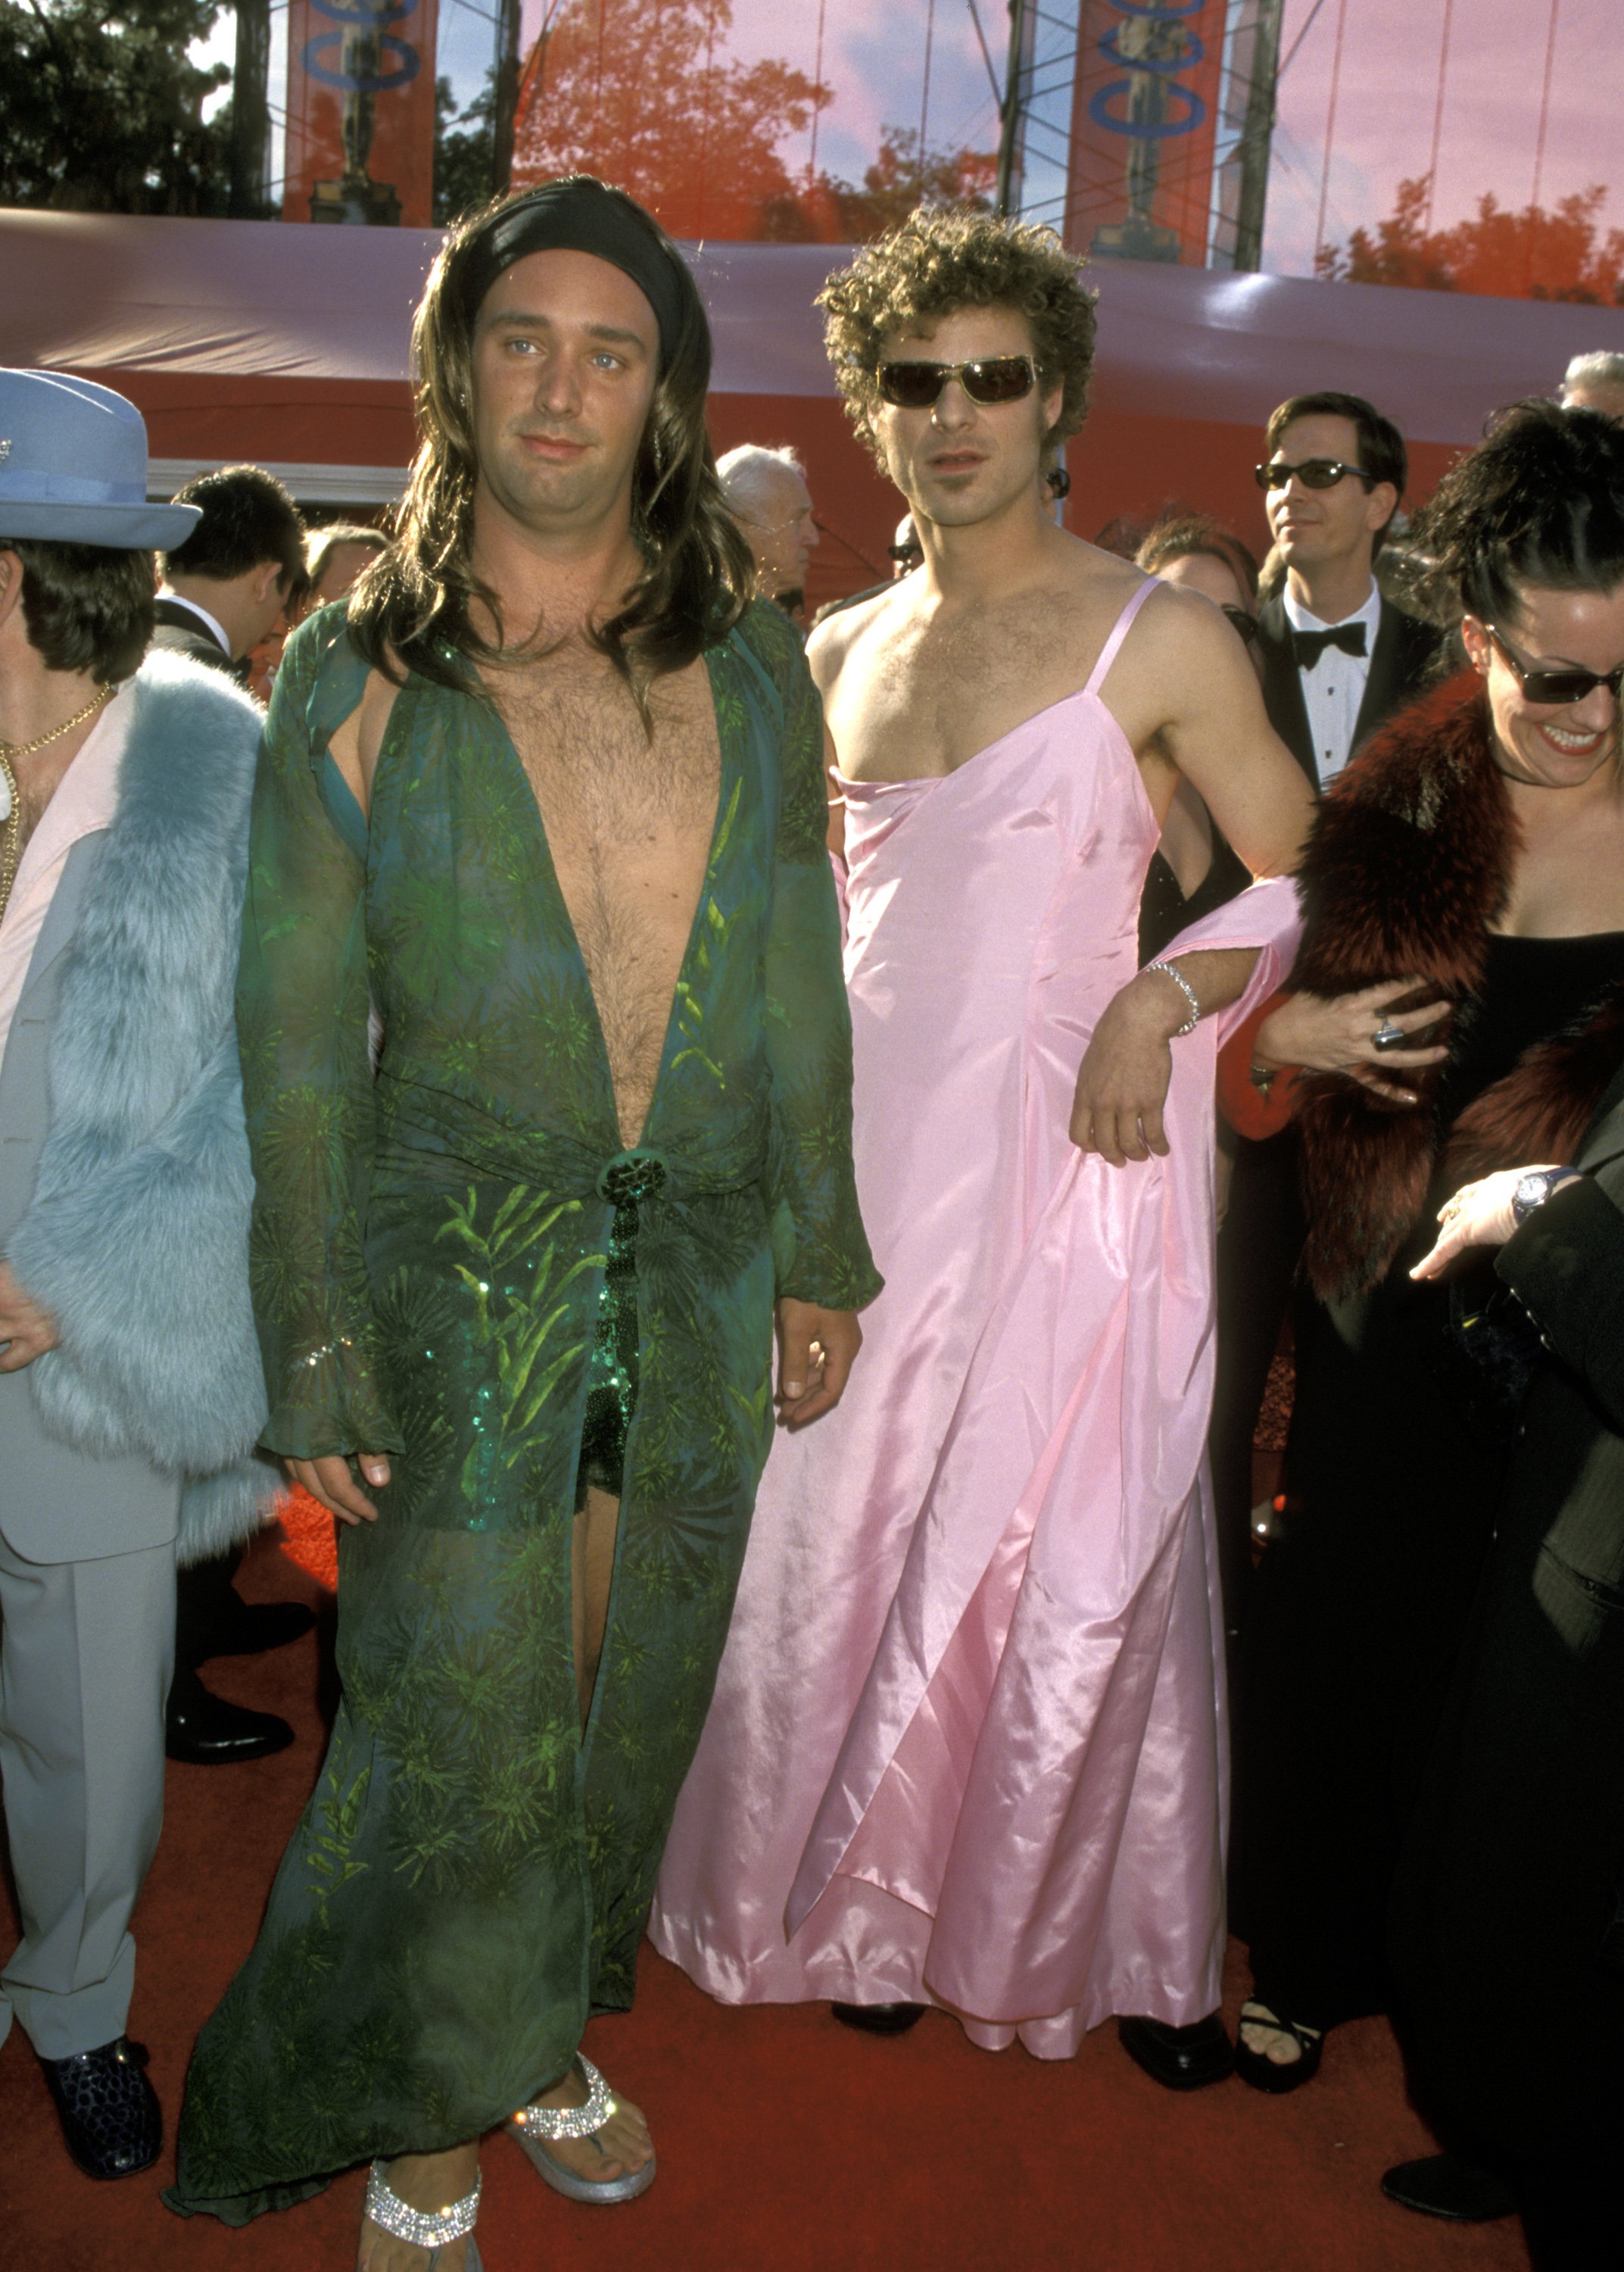 South Park' Trey Parker and Matt Think Their Dress Got Them Banned From the Oscars